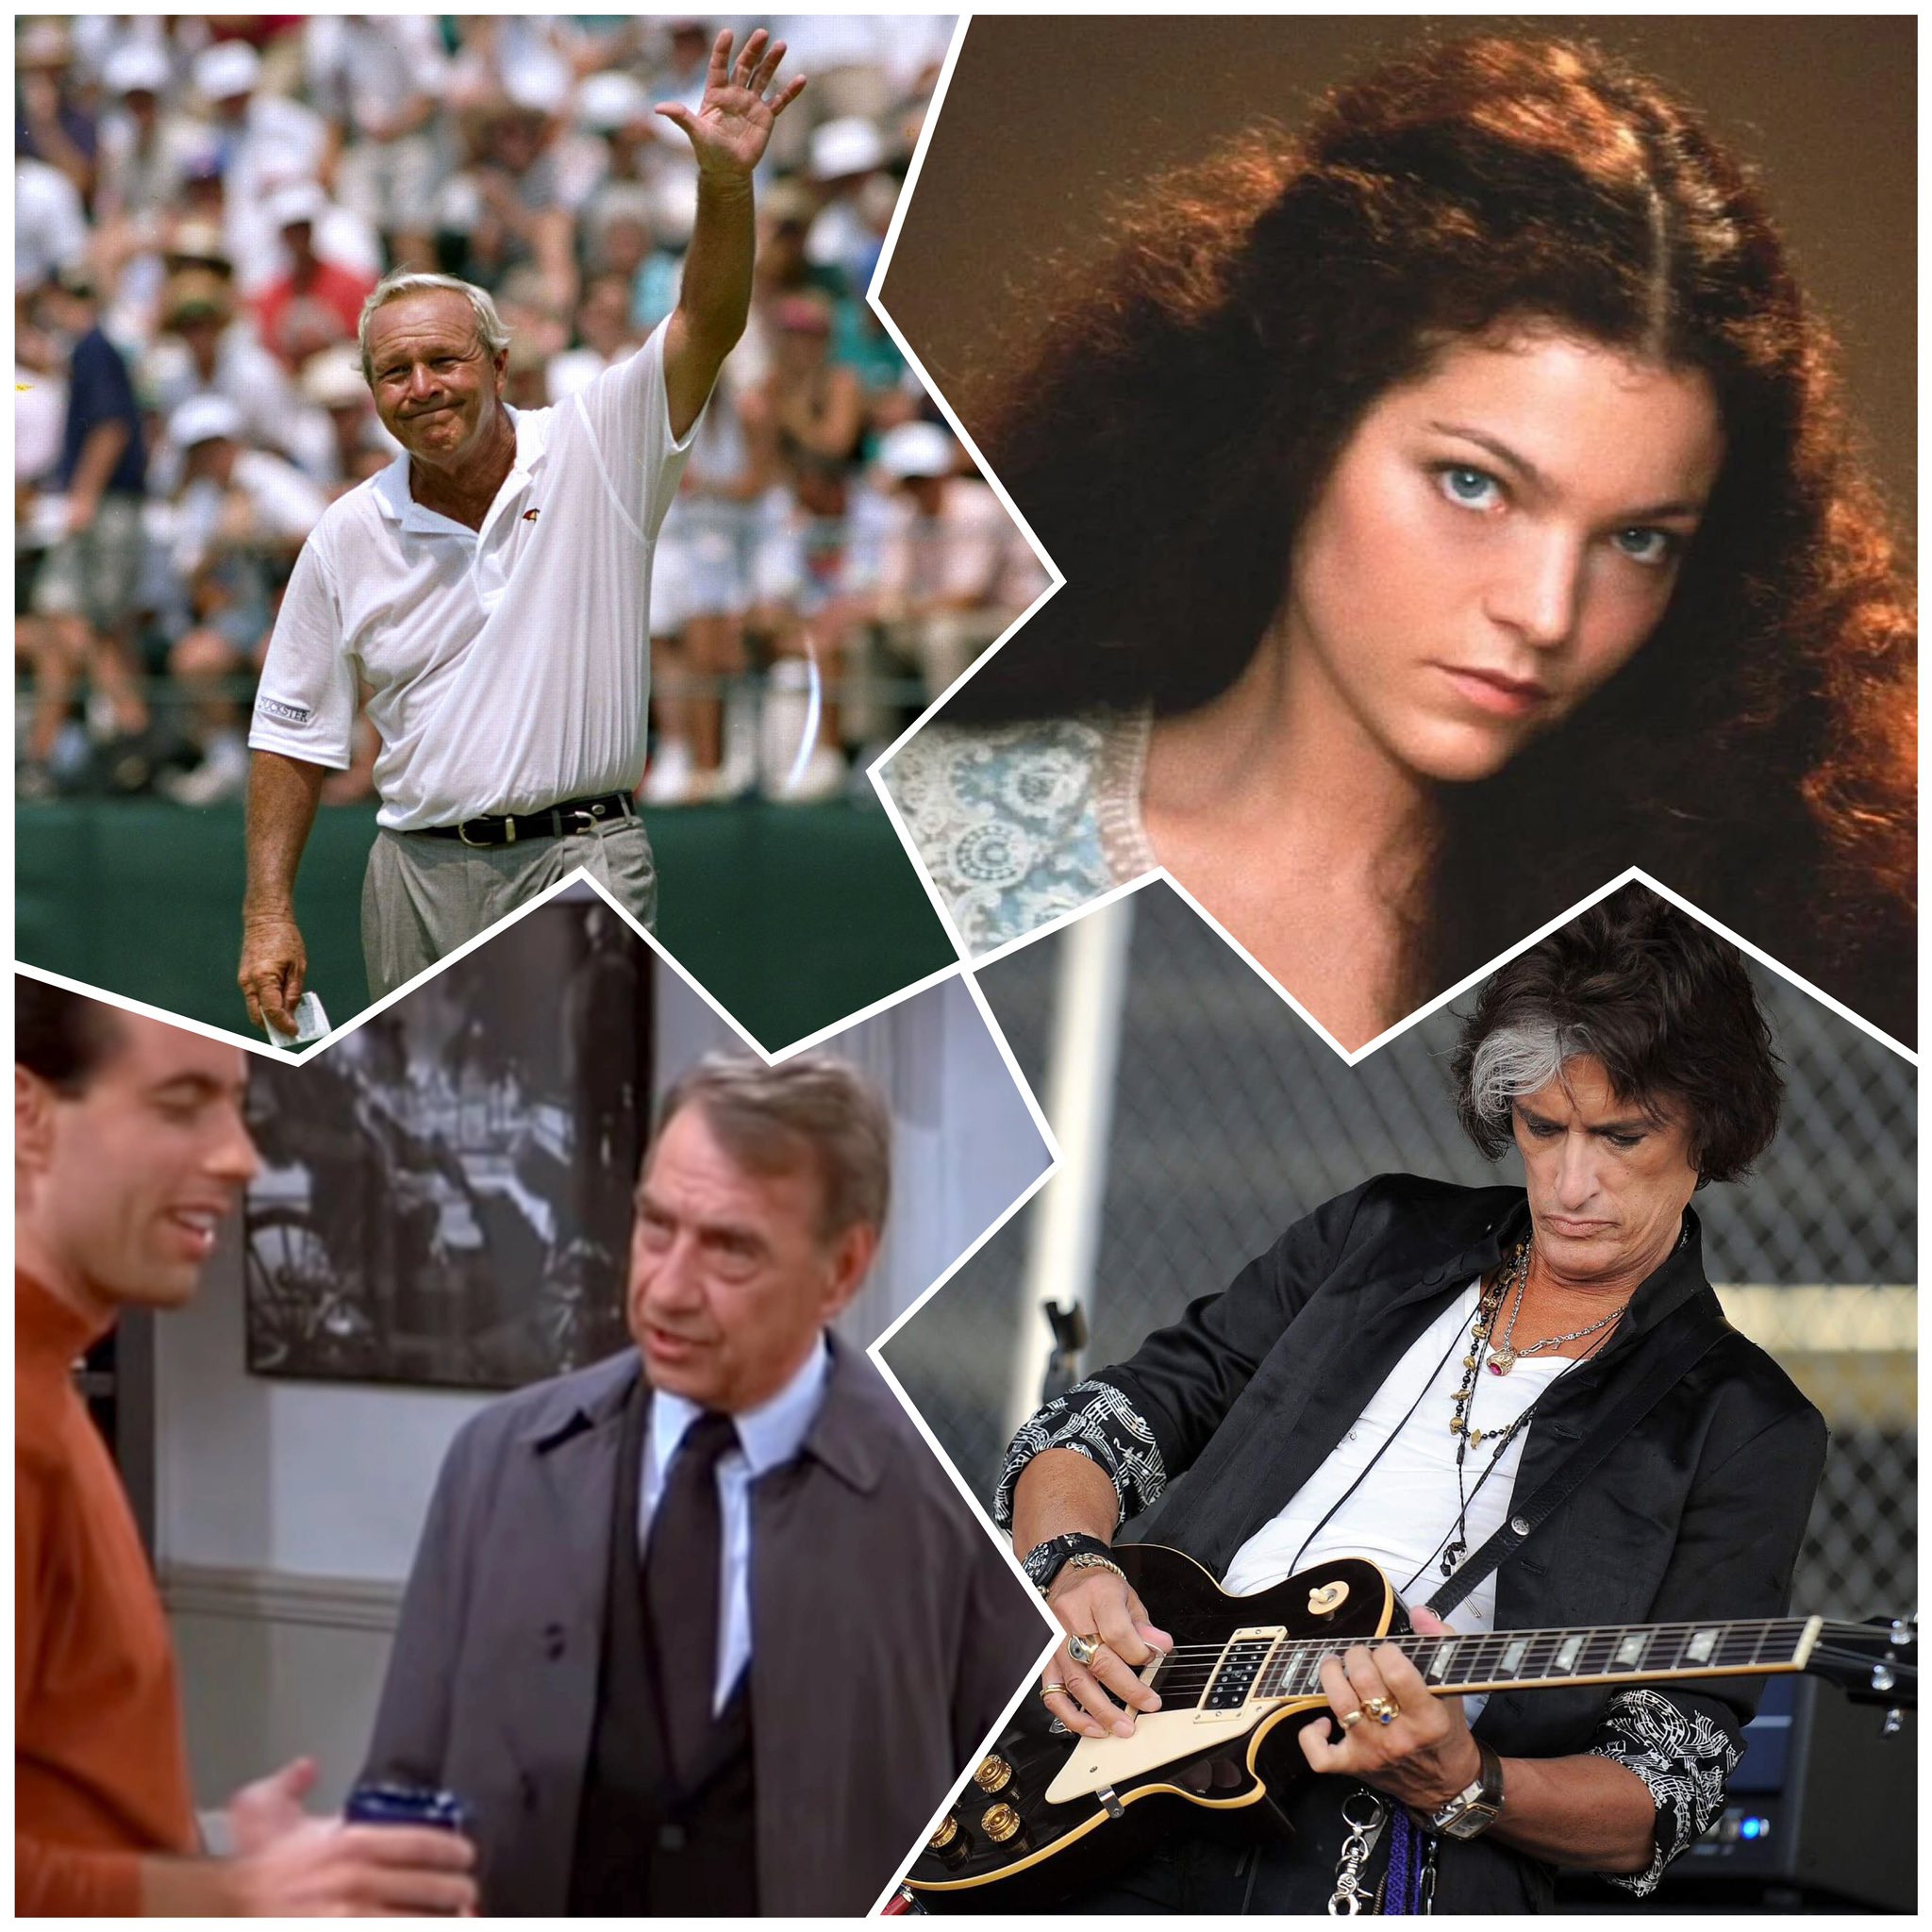 Happy Birthday to 

Joe Perry
Amy Irving 
Philip Baker Hall 
And the late great Arnold Palmer 